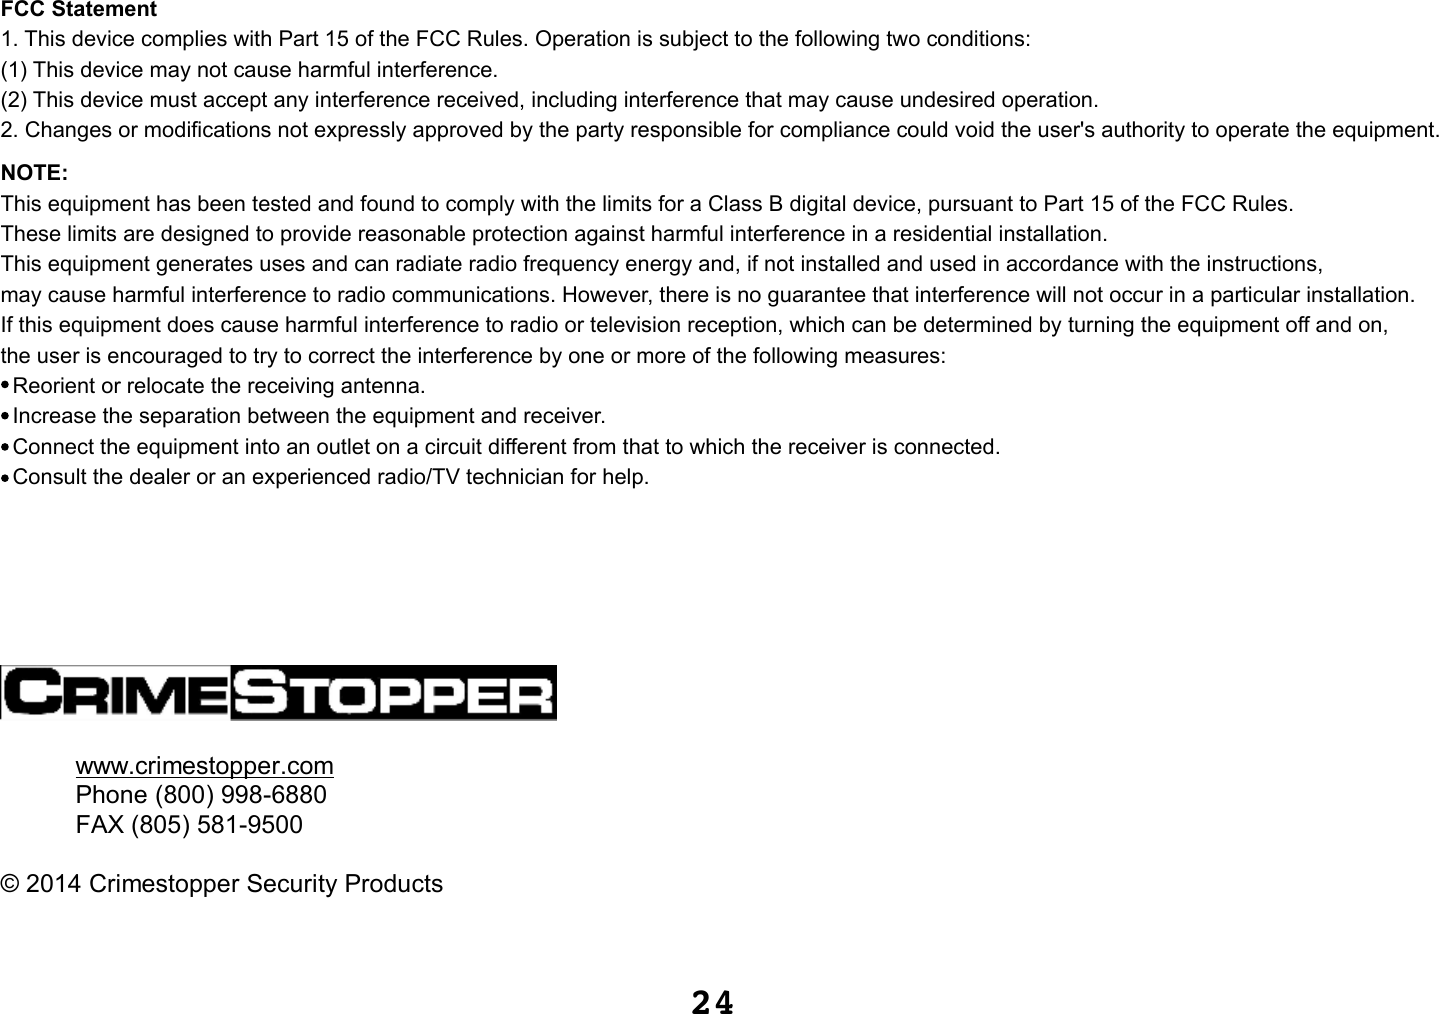 24www.crimestopper.comPhone (800) 998-6880FAX (805) 581-9500©2014 Crimestopper Security ProductsFCC Statement1. This device complies with Part 15 of the FCC Rules. Operation is subject to the following two conditions:(1) This device may not cause harmful interference.(2) This device must accept any interference received, including interference that may cause undesired operation.2. Changes or modifications not expressly approved by the party responsible for compliance could void the user&apos;s authority to operate the equipment.NOTE: This equipment has been tested and found to comply with the limits for a Class B digital device, pursuant to Part 15 of the FCC Rules. These limits are designed to provide reasonable protection against harmful interference in a residential installation.This equipment generates uses and can radiate radio frequency energy and, if not installed and used in accordance with the instructions, may cause harmful interference to radio communications. However, there is no guarantee that interference will not occur in a particular installation. If this equipment does cause harmful interference to radio or television reception, which can be determined by turning the equipment off and on, the user is encouraged to try to correct the interference by one or more of the following measures:  Reorient or relocate the receiving antenna.  Increase the separation between the equipment and receiver.  Connect the equipment into an outlet on a circuit different from that to which the receiver is connected.   Consult the dealer or an experienced radio/TV technician for help.